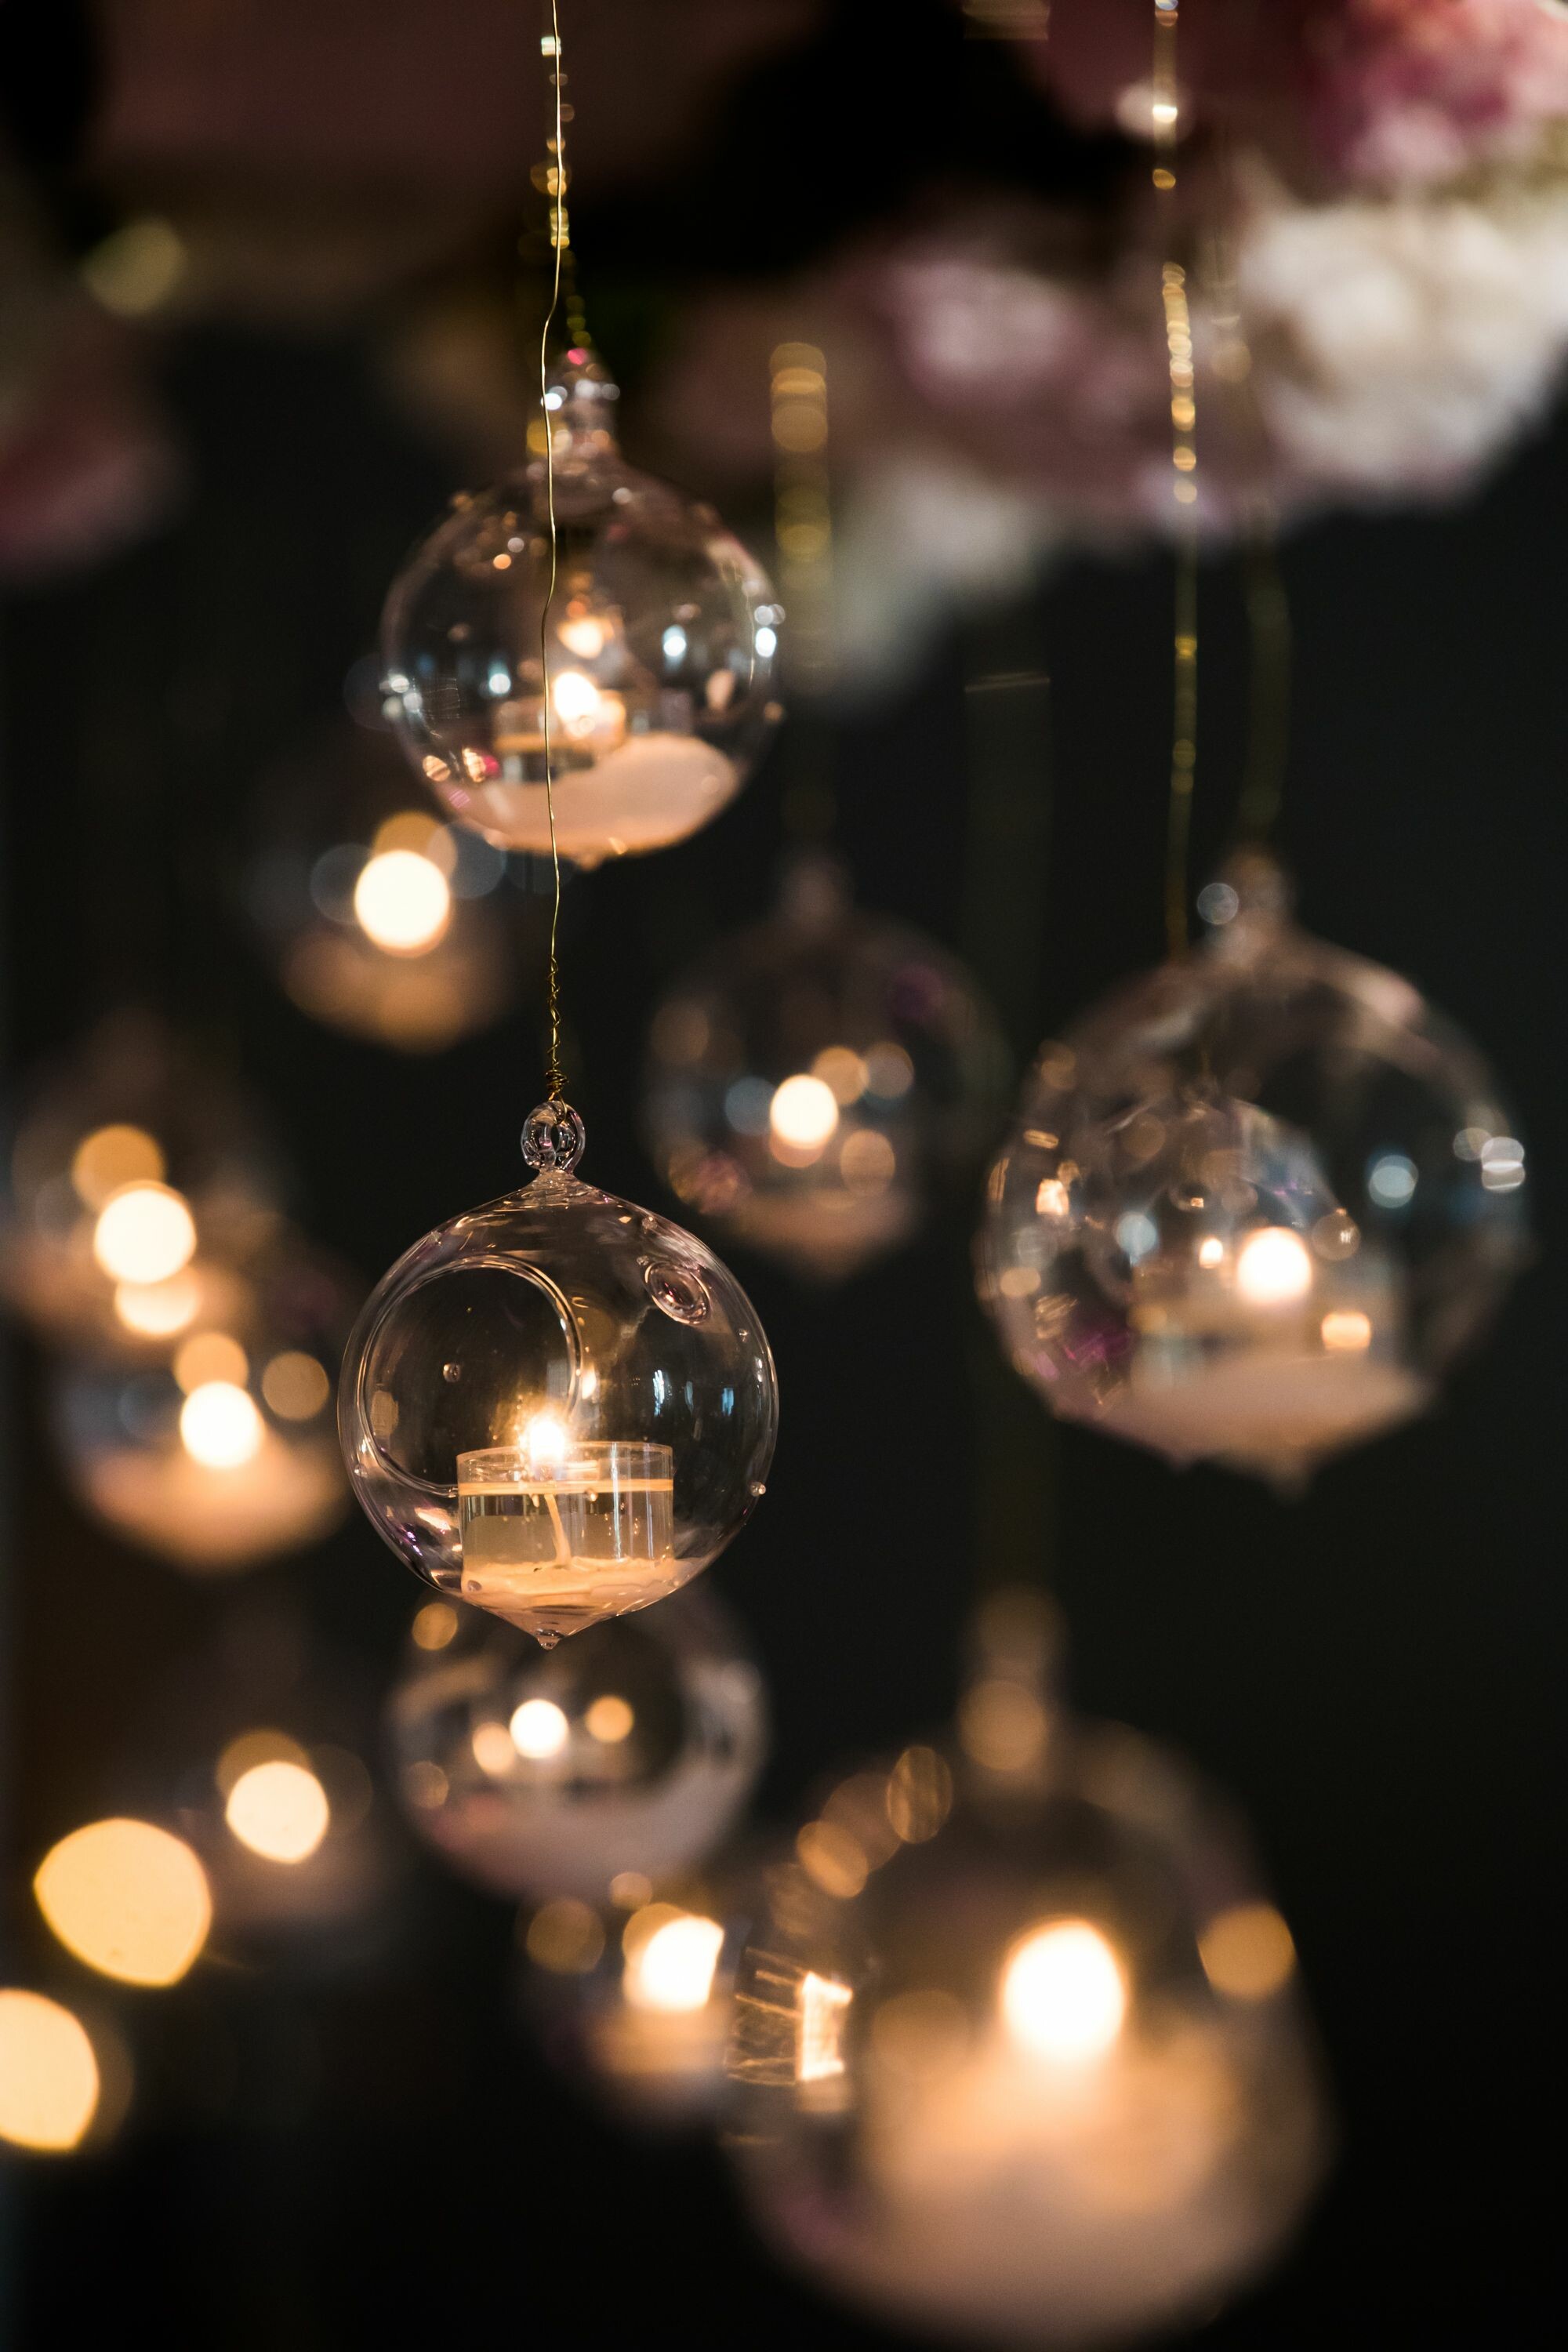 Fairy Lights: The ornaments created a magical look inside the ceremony, Illumination. 2000x3000 HD Wallpaper.